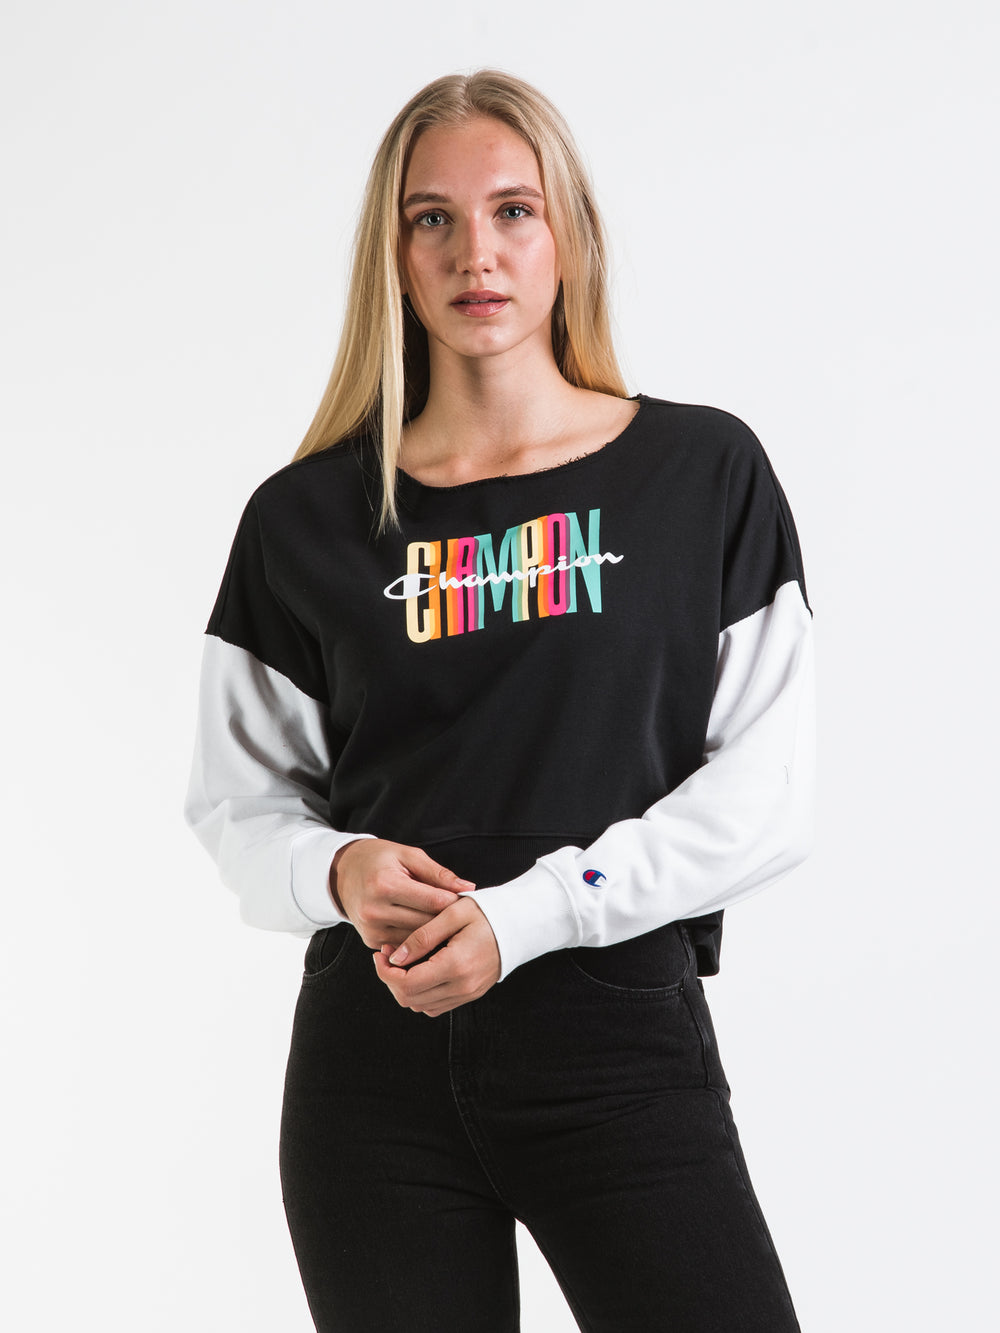 CHAMPION CAMPUS FRENCH TERRY CREW SWEATSHIRT - CLEARANCE